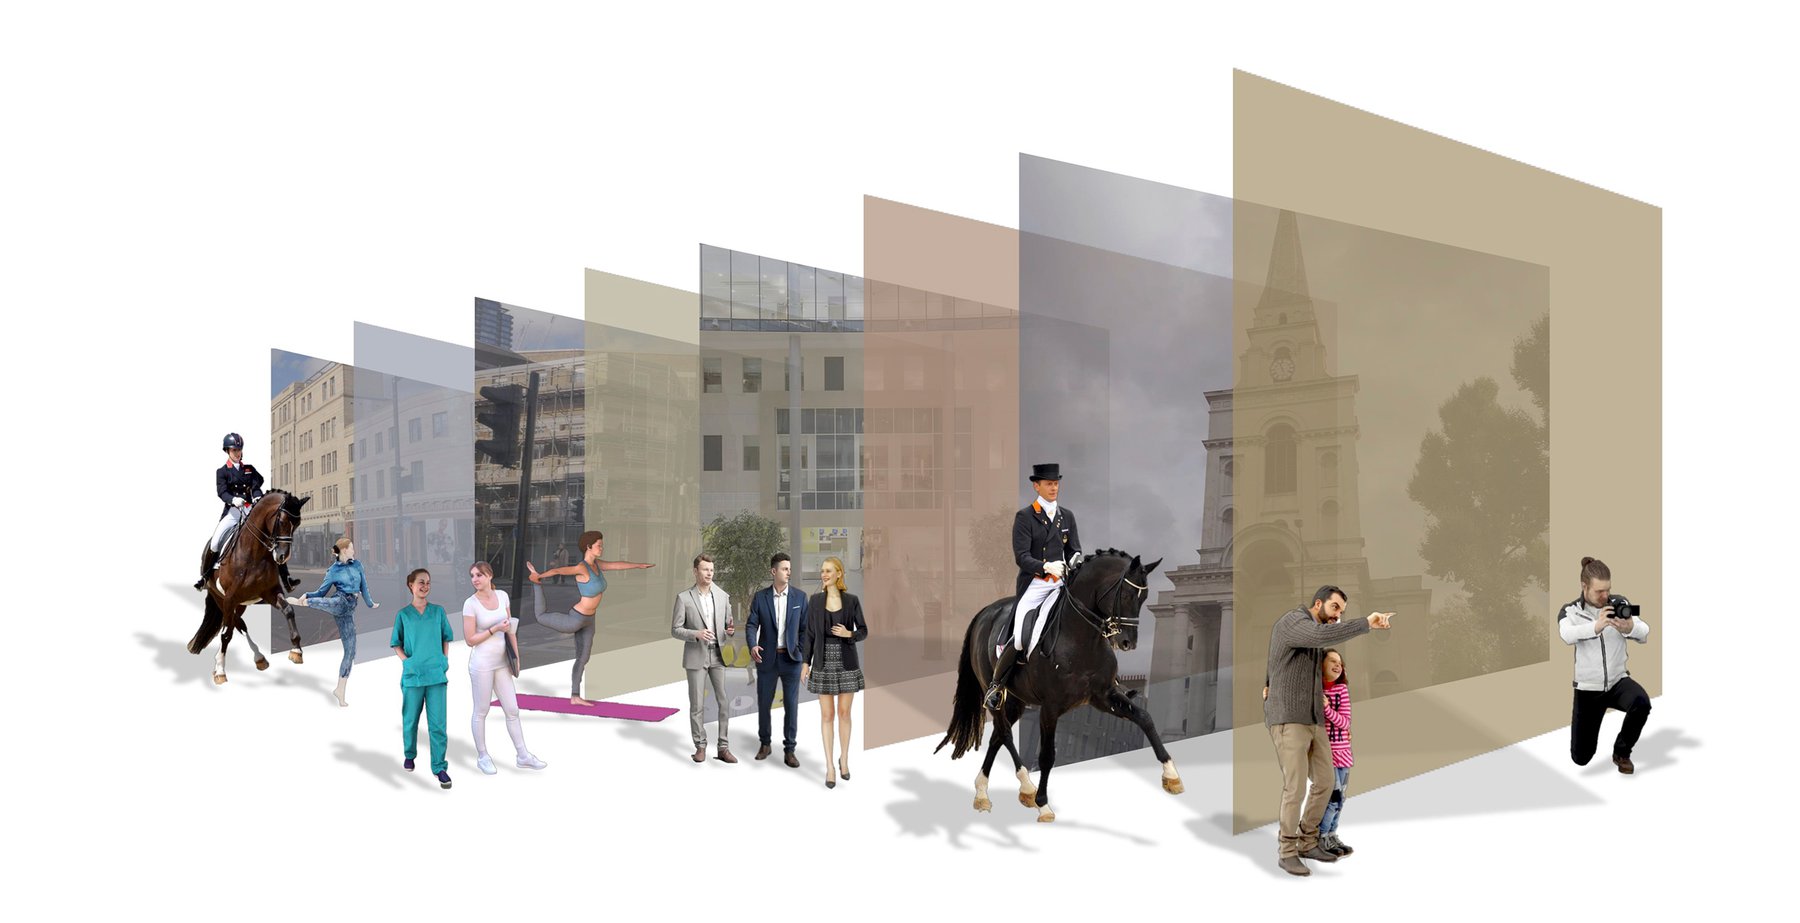 Rhythm Balance Harmony | Six activity zones framed around horse dressage connecting to the historical context of the building